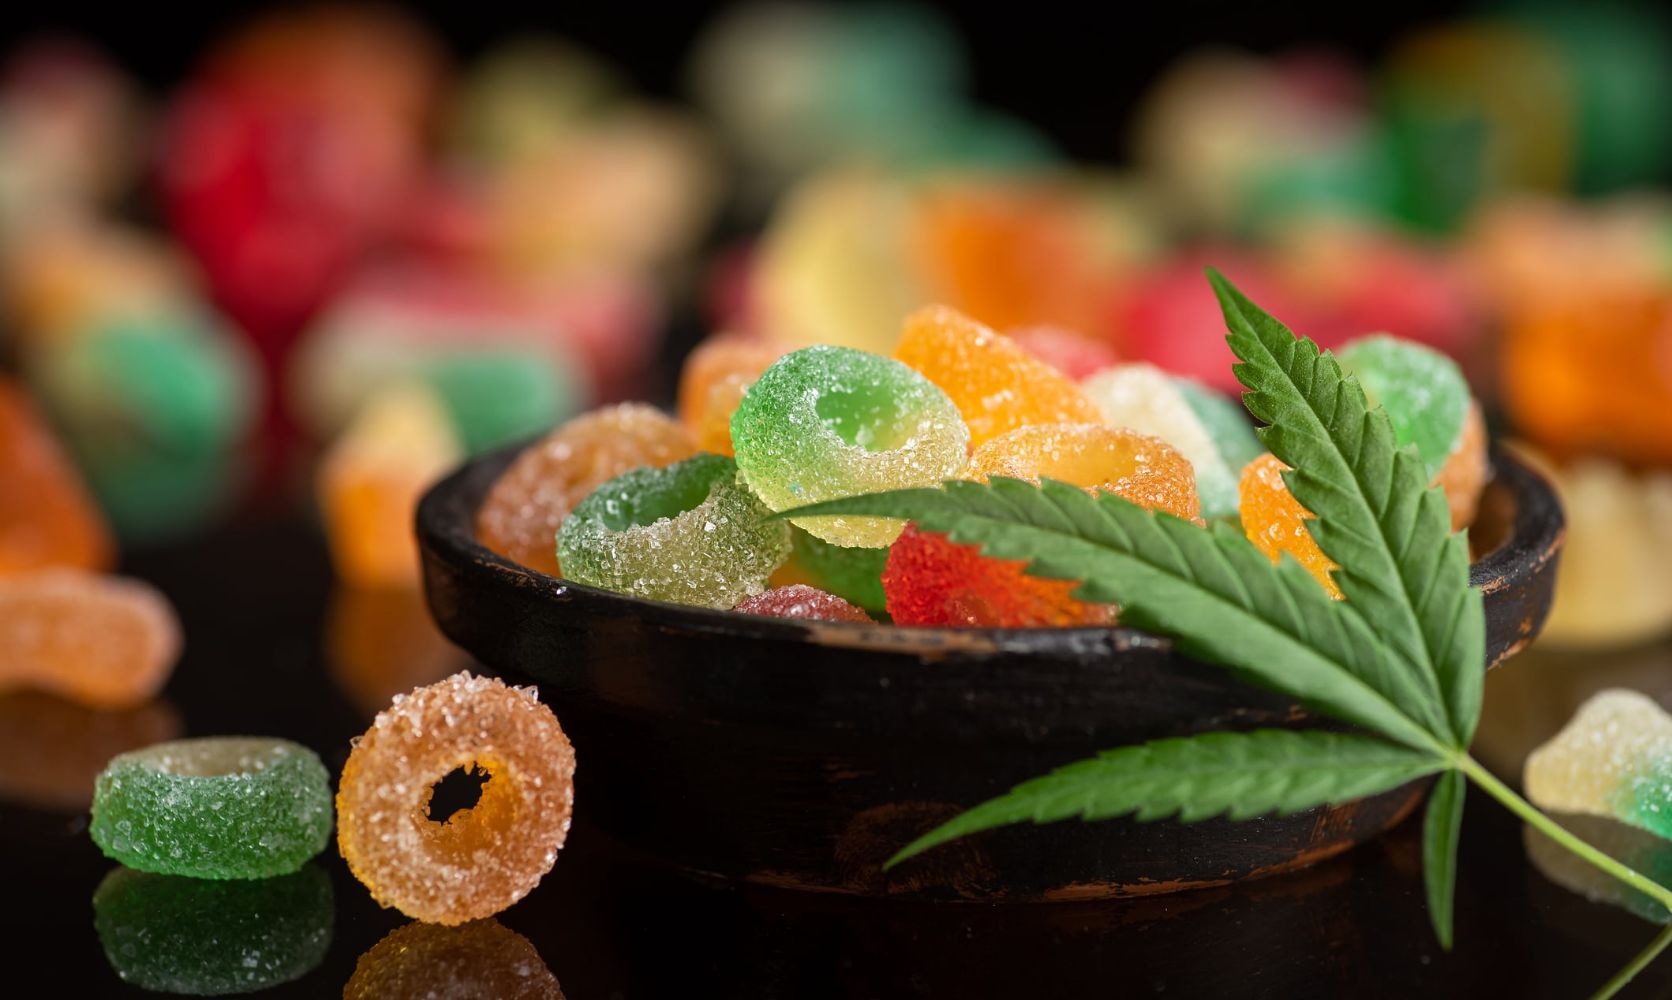 Most Potent Edibles Online in Canada Finally Hit the Shelves